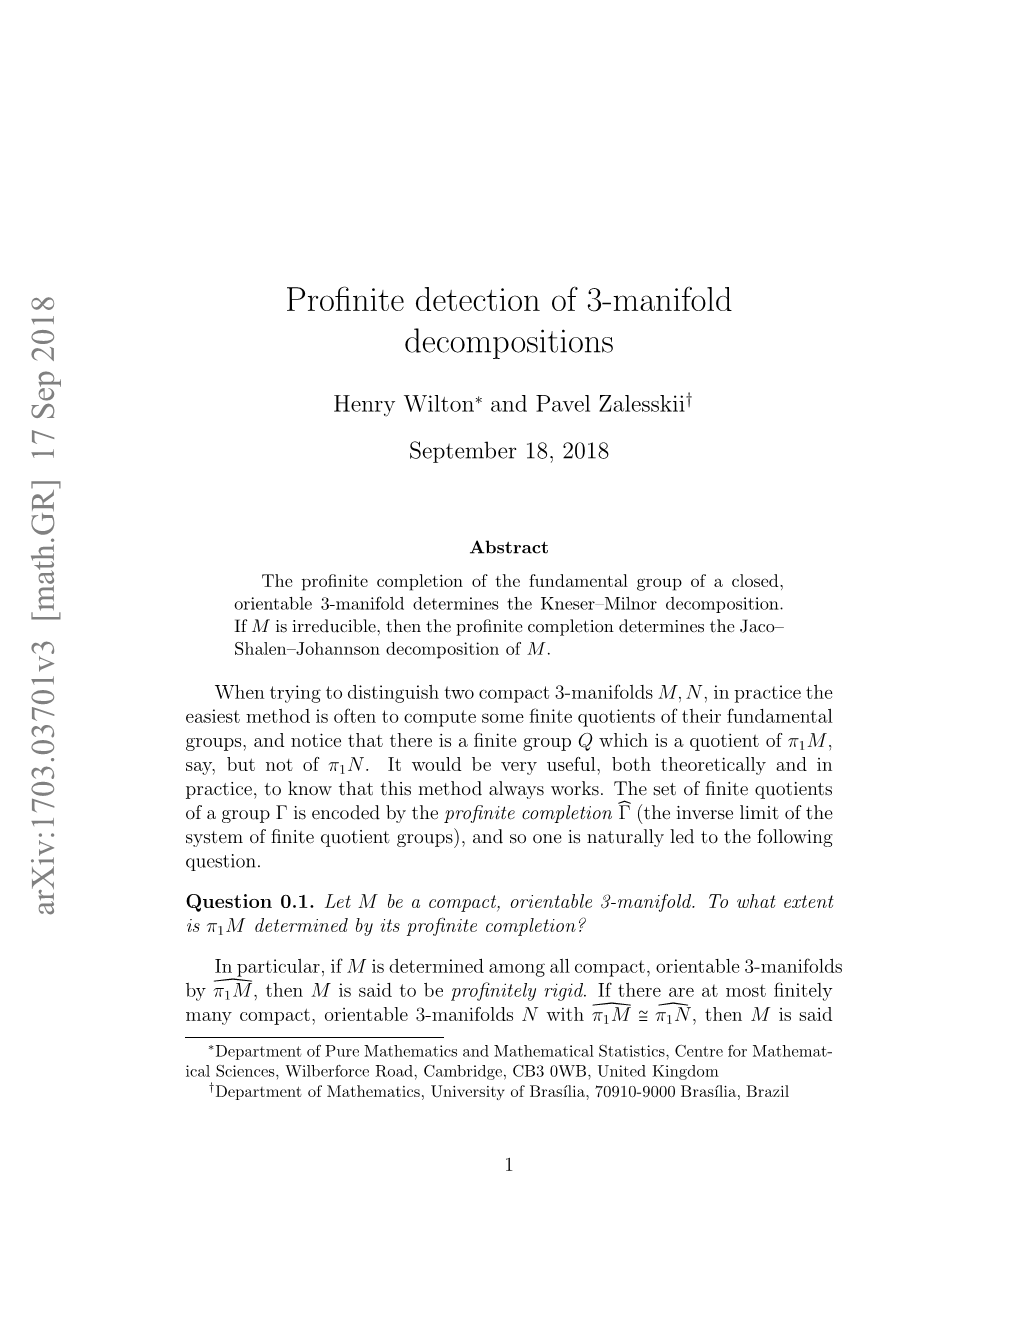 Profinite Detection of 3-Manifold Decompositions